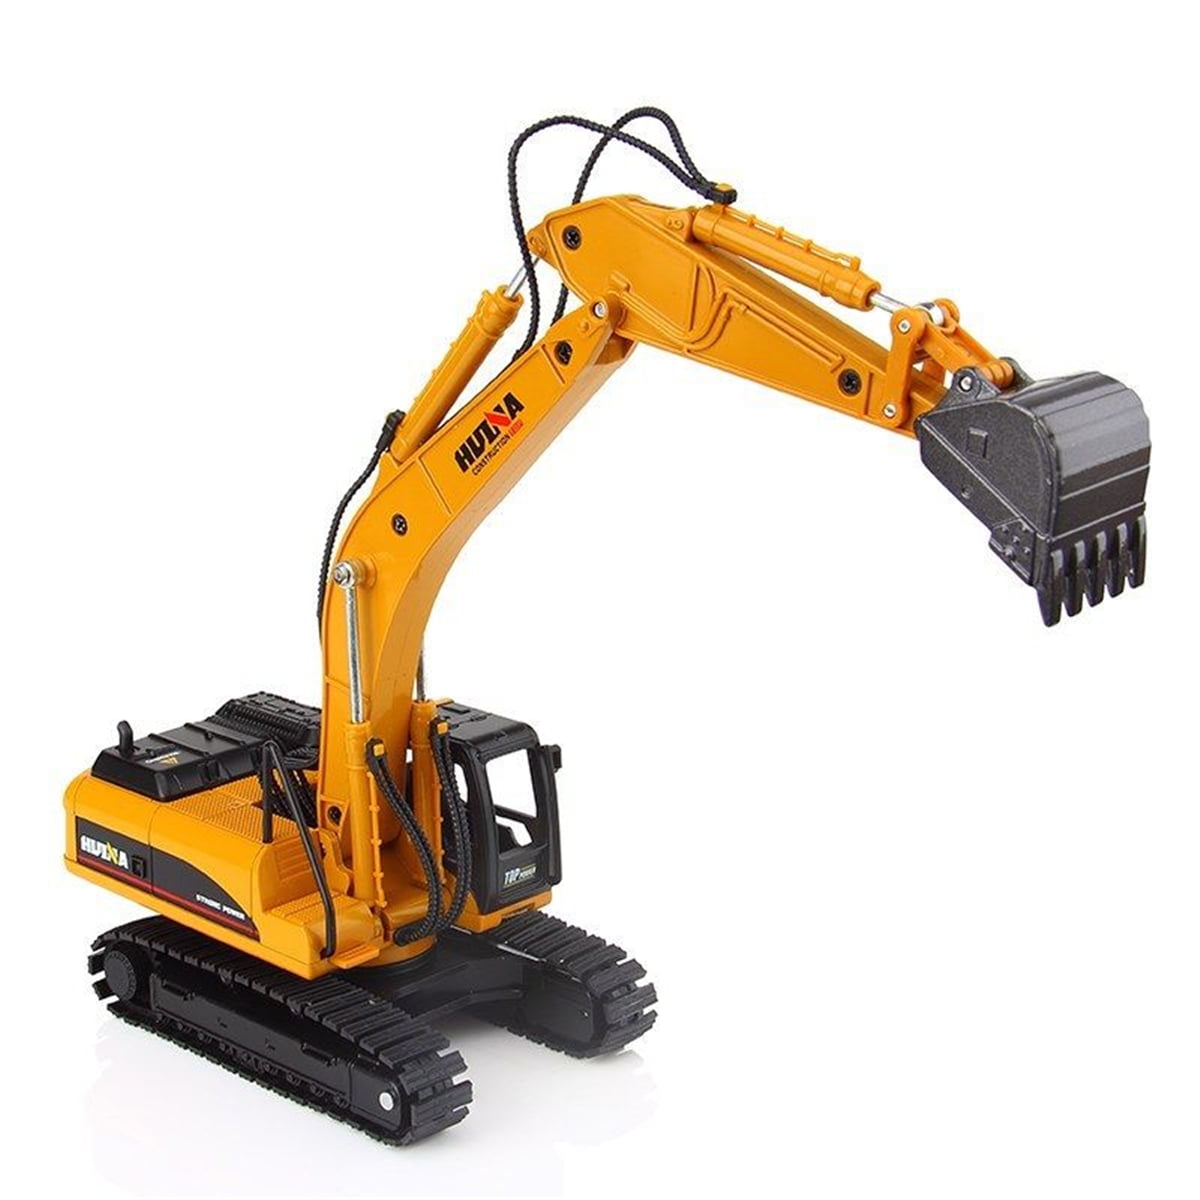 1/50 Mini Orange Engineering Excavator Digger Toy for Home Table Decoration 